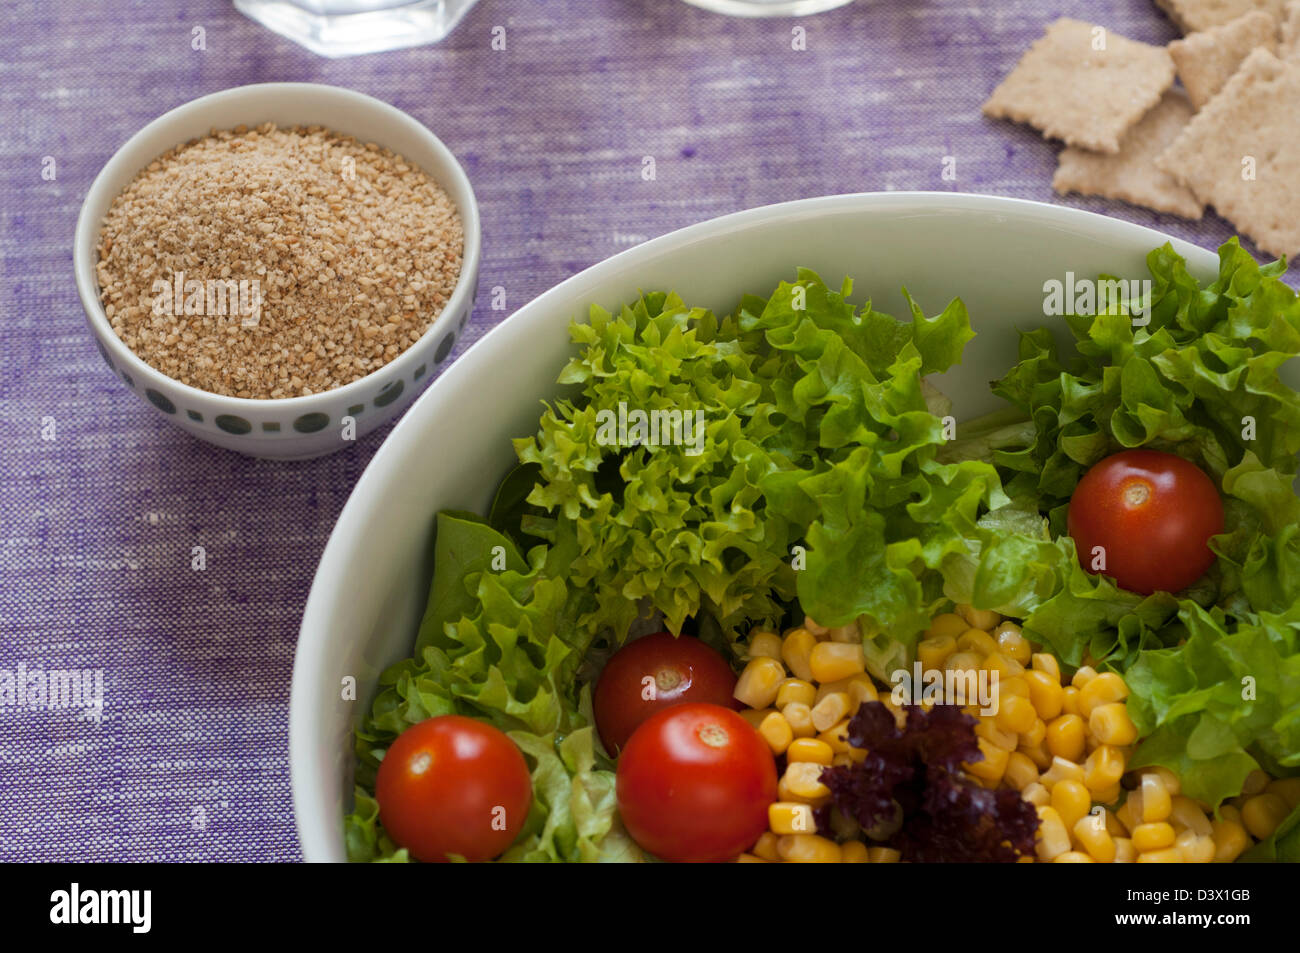 Close-up view of fresh organic mixed salad: lettuce, sweet corn, tomato. Gomasio condiment on the left Stock Photo